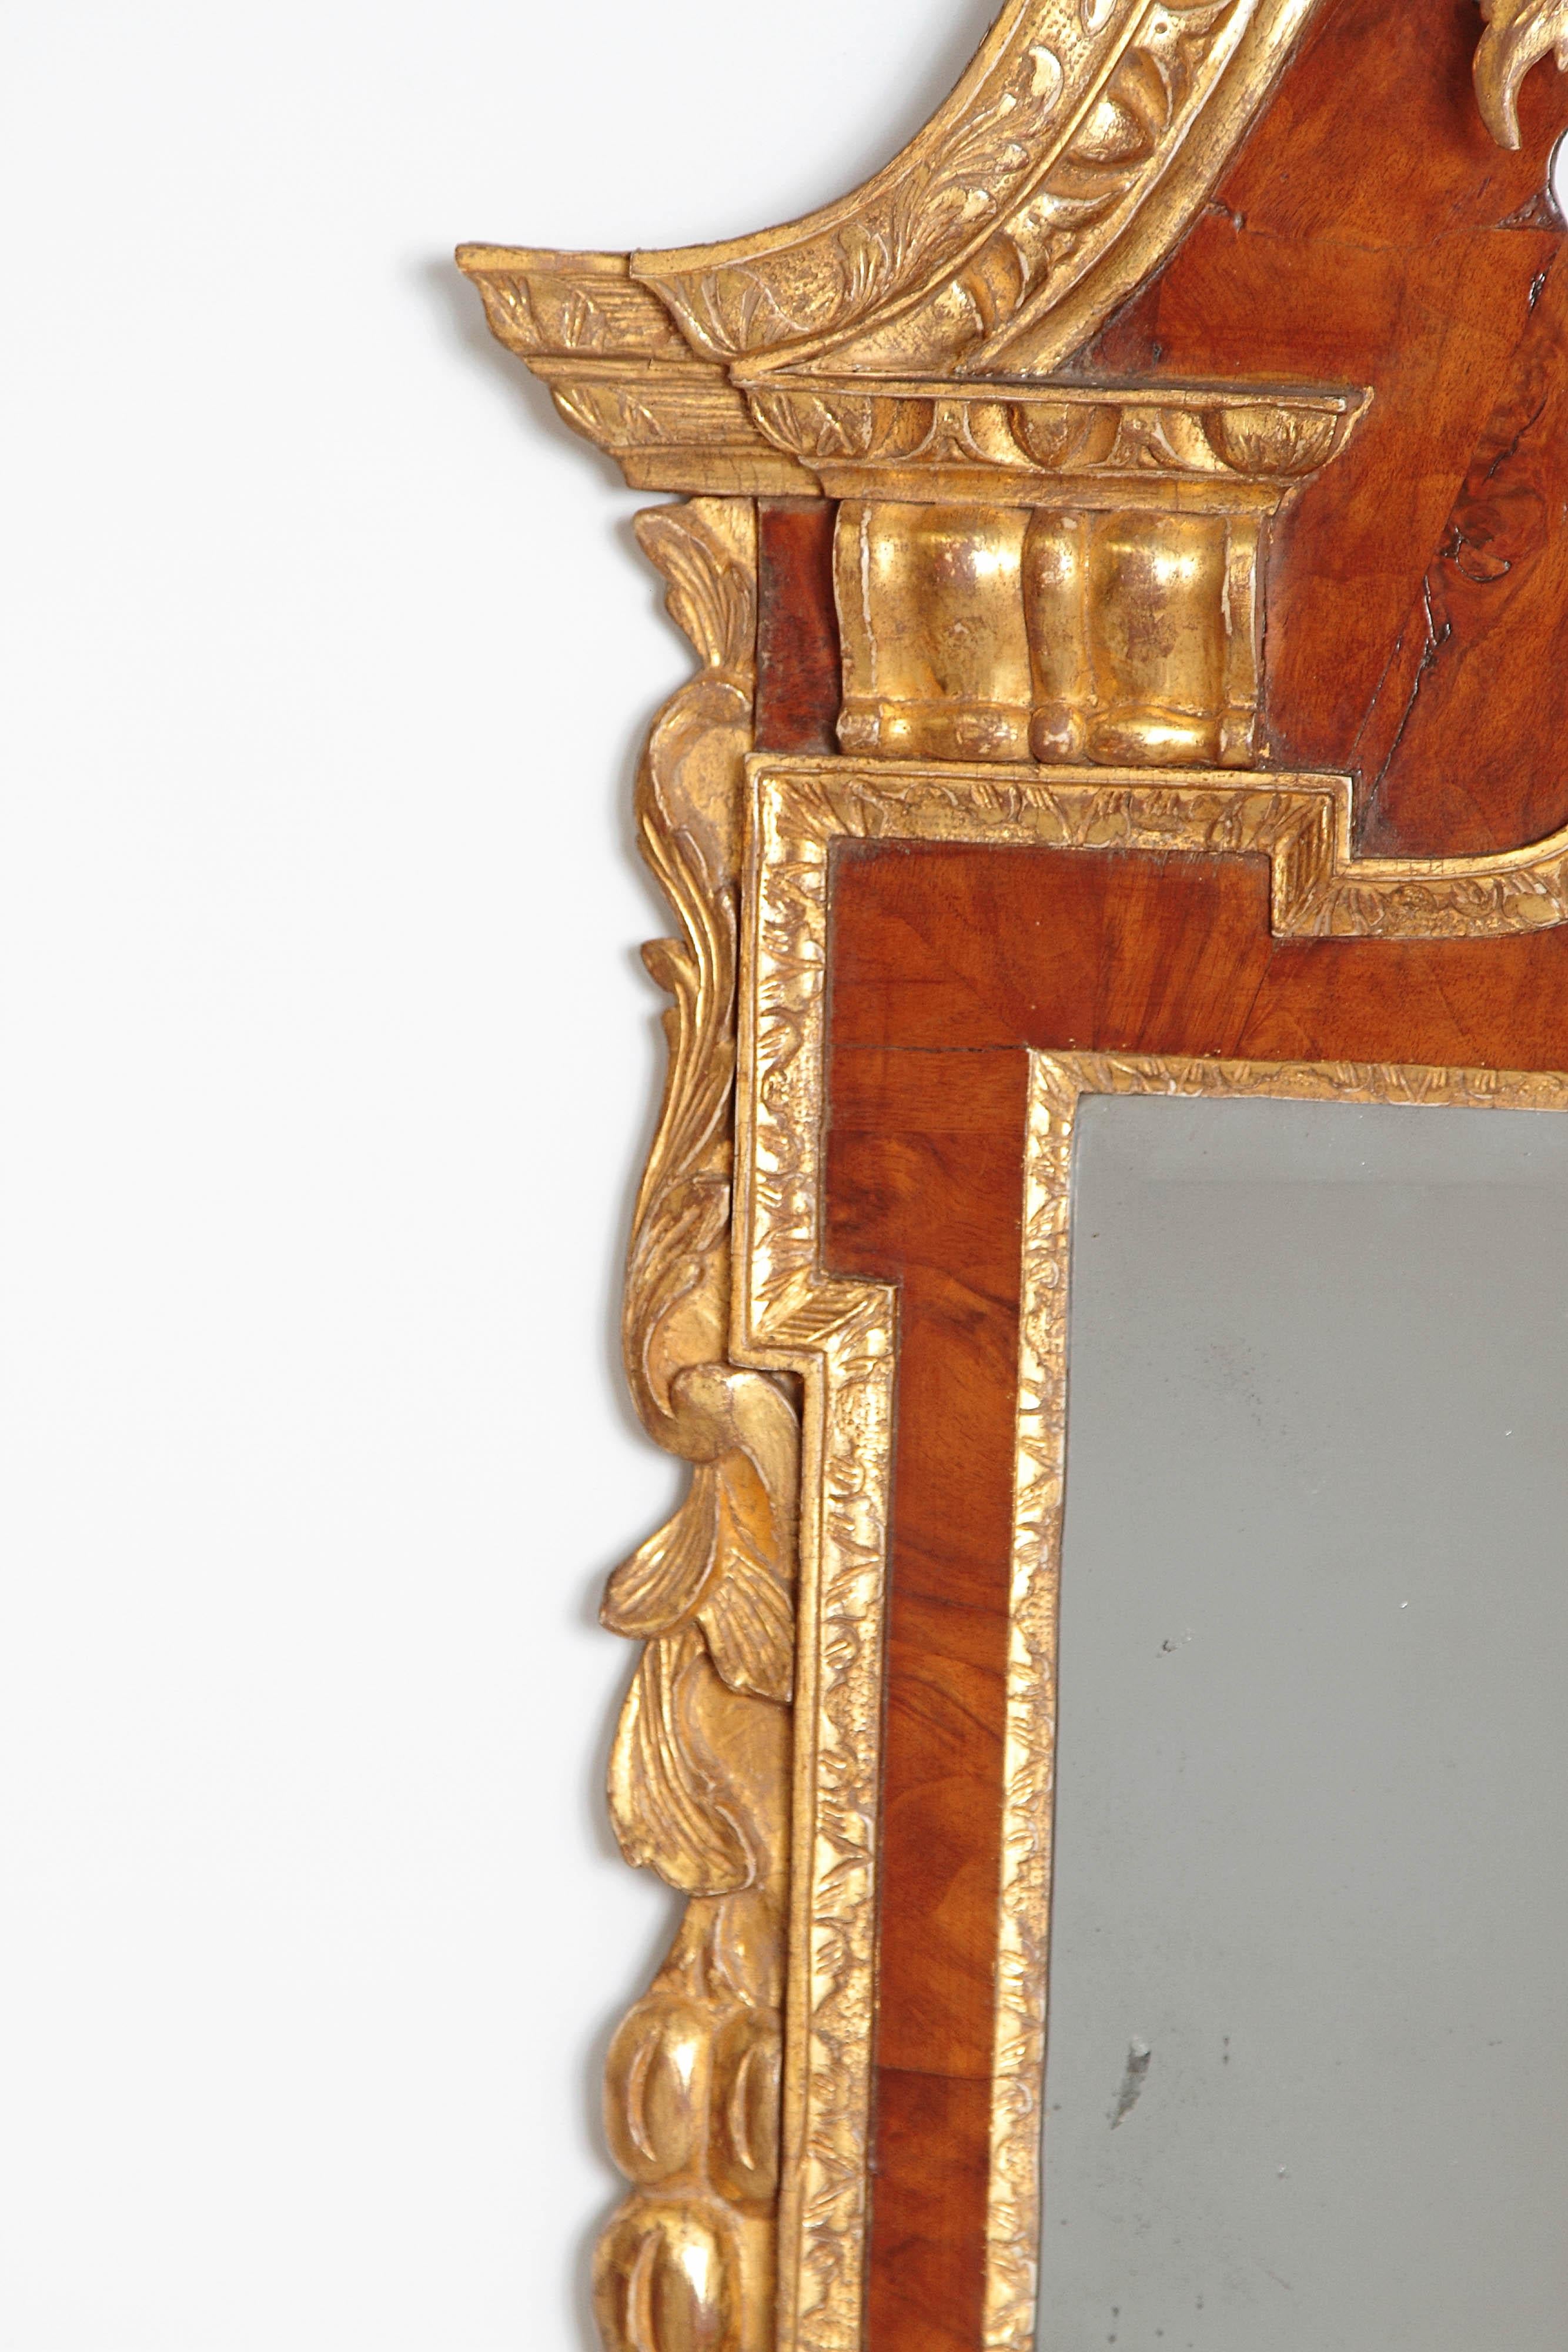 18th Century Period George II Pier Glass with Bookmatched Walnut Veneers